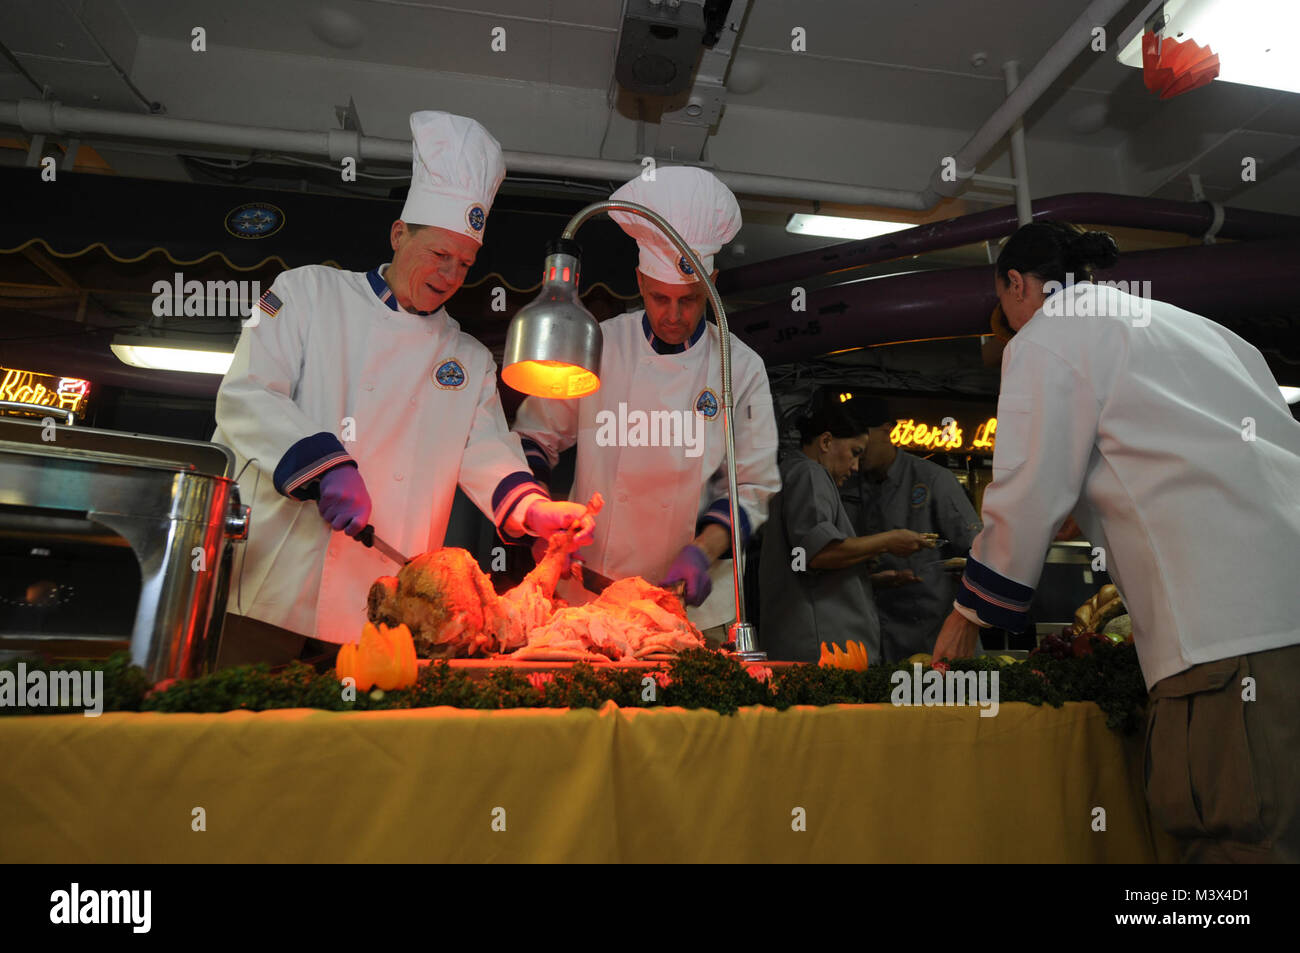 PACIFIC OCEAN (Nov. 28, 2013) – Rear Adm. Michael S. White, commander, Carrier Strike Group 11, left, and Capt. J.J. Cummings, executive officer of the aircraft carrier USS Nimitz (CVN 68), carve a turkey during a Thanksgiving meal served aboard Nimitz. Nimitz is deployed to the U.S. 7th Fleet area of responsibility supporting security and stability in the Indo-Asia-Pacific region. (U.S. Navy photo by Mass Communication Specialist Seaman Apprentice Kelly M. Agee/ Released) 131128-N-AZ866-227.JPG by USS NIMITZ (CVN 68) Stock Photo